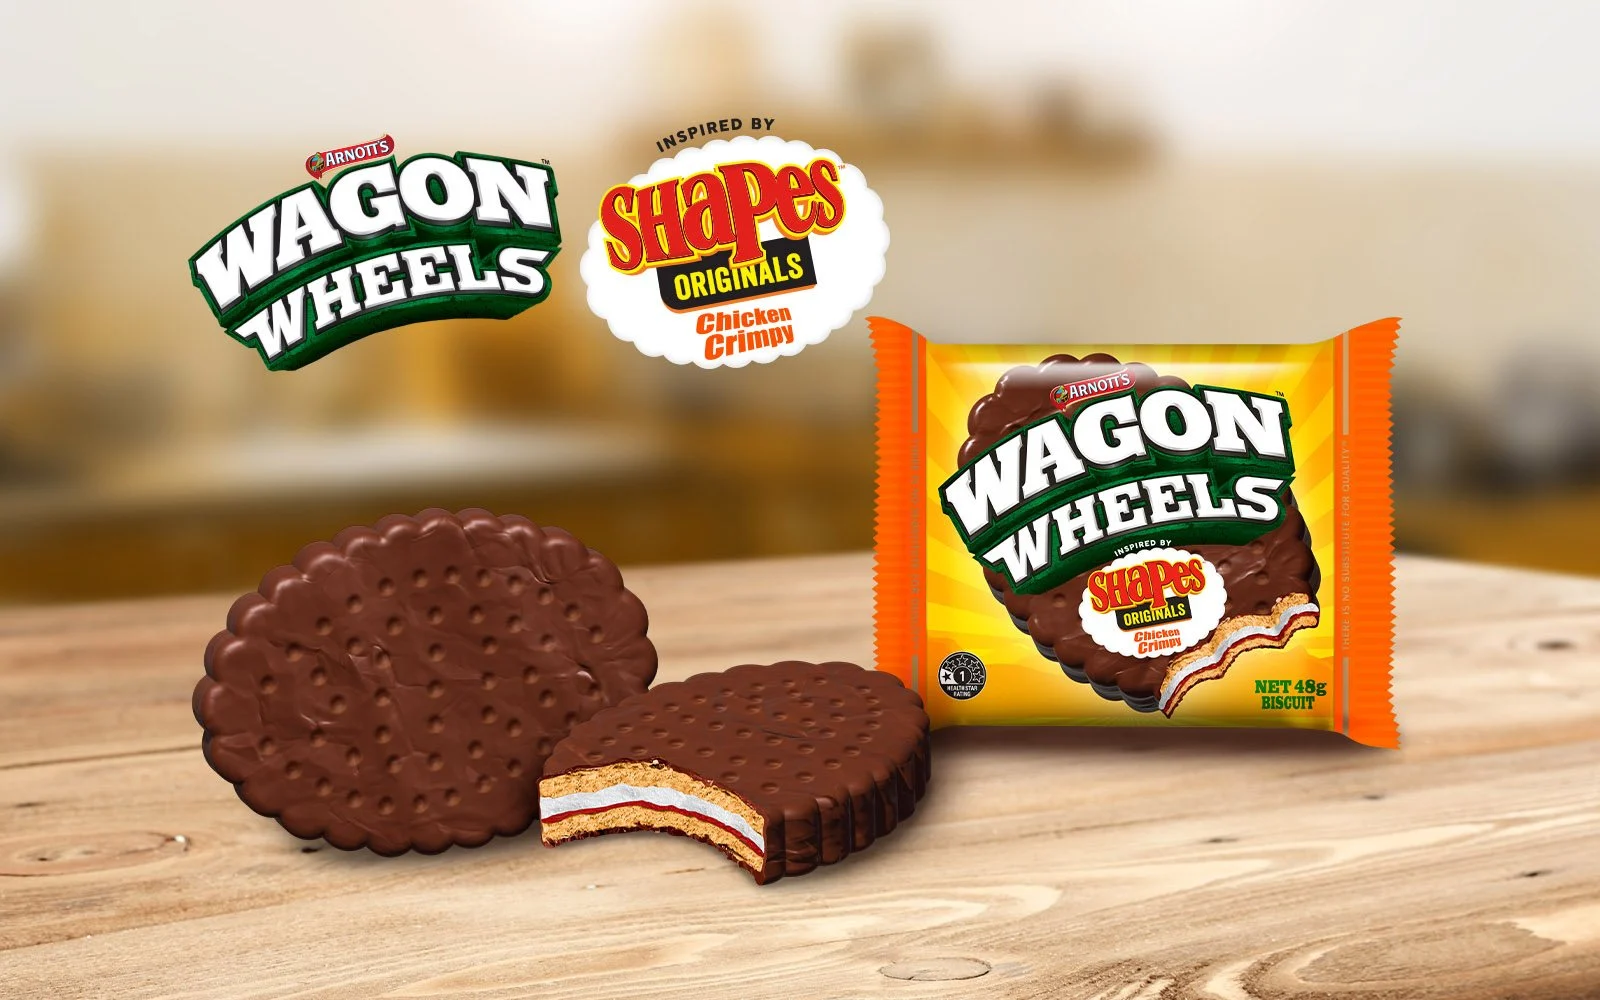 Arnott's Wagon Wheels Inspired by Chicken Crimpy Shapes